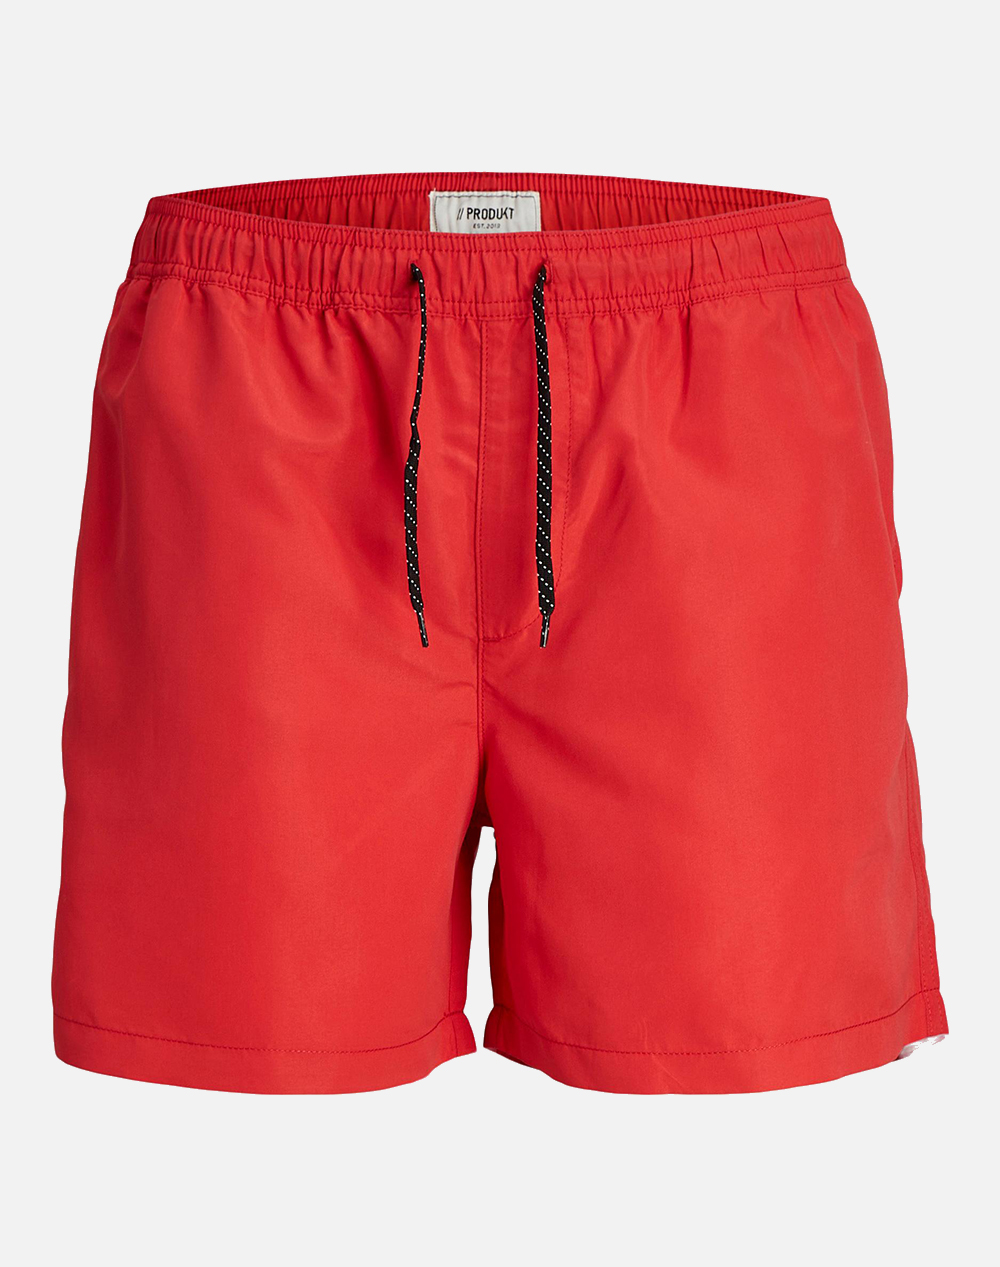 PRODUKT PKTAKM SOLID SWIMSHORTS 12252193-Chinese Red Red 3820APROD1600008_XR19960